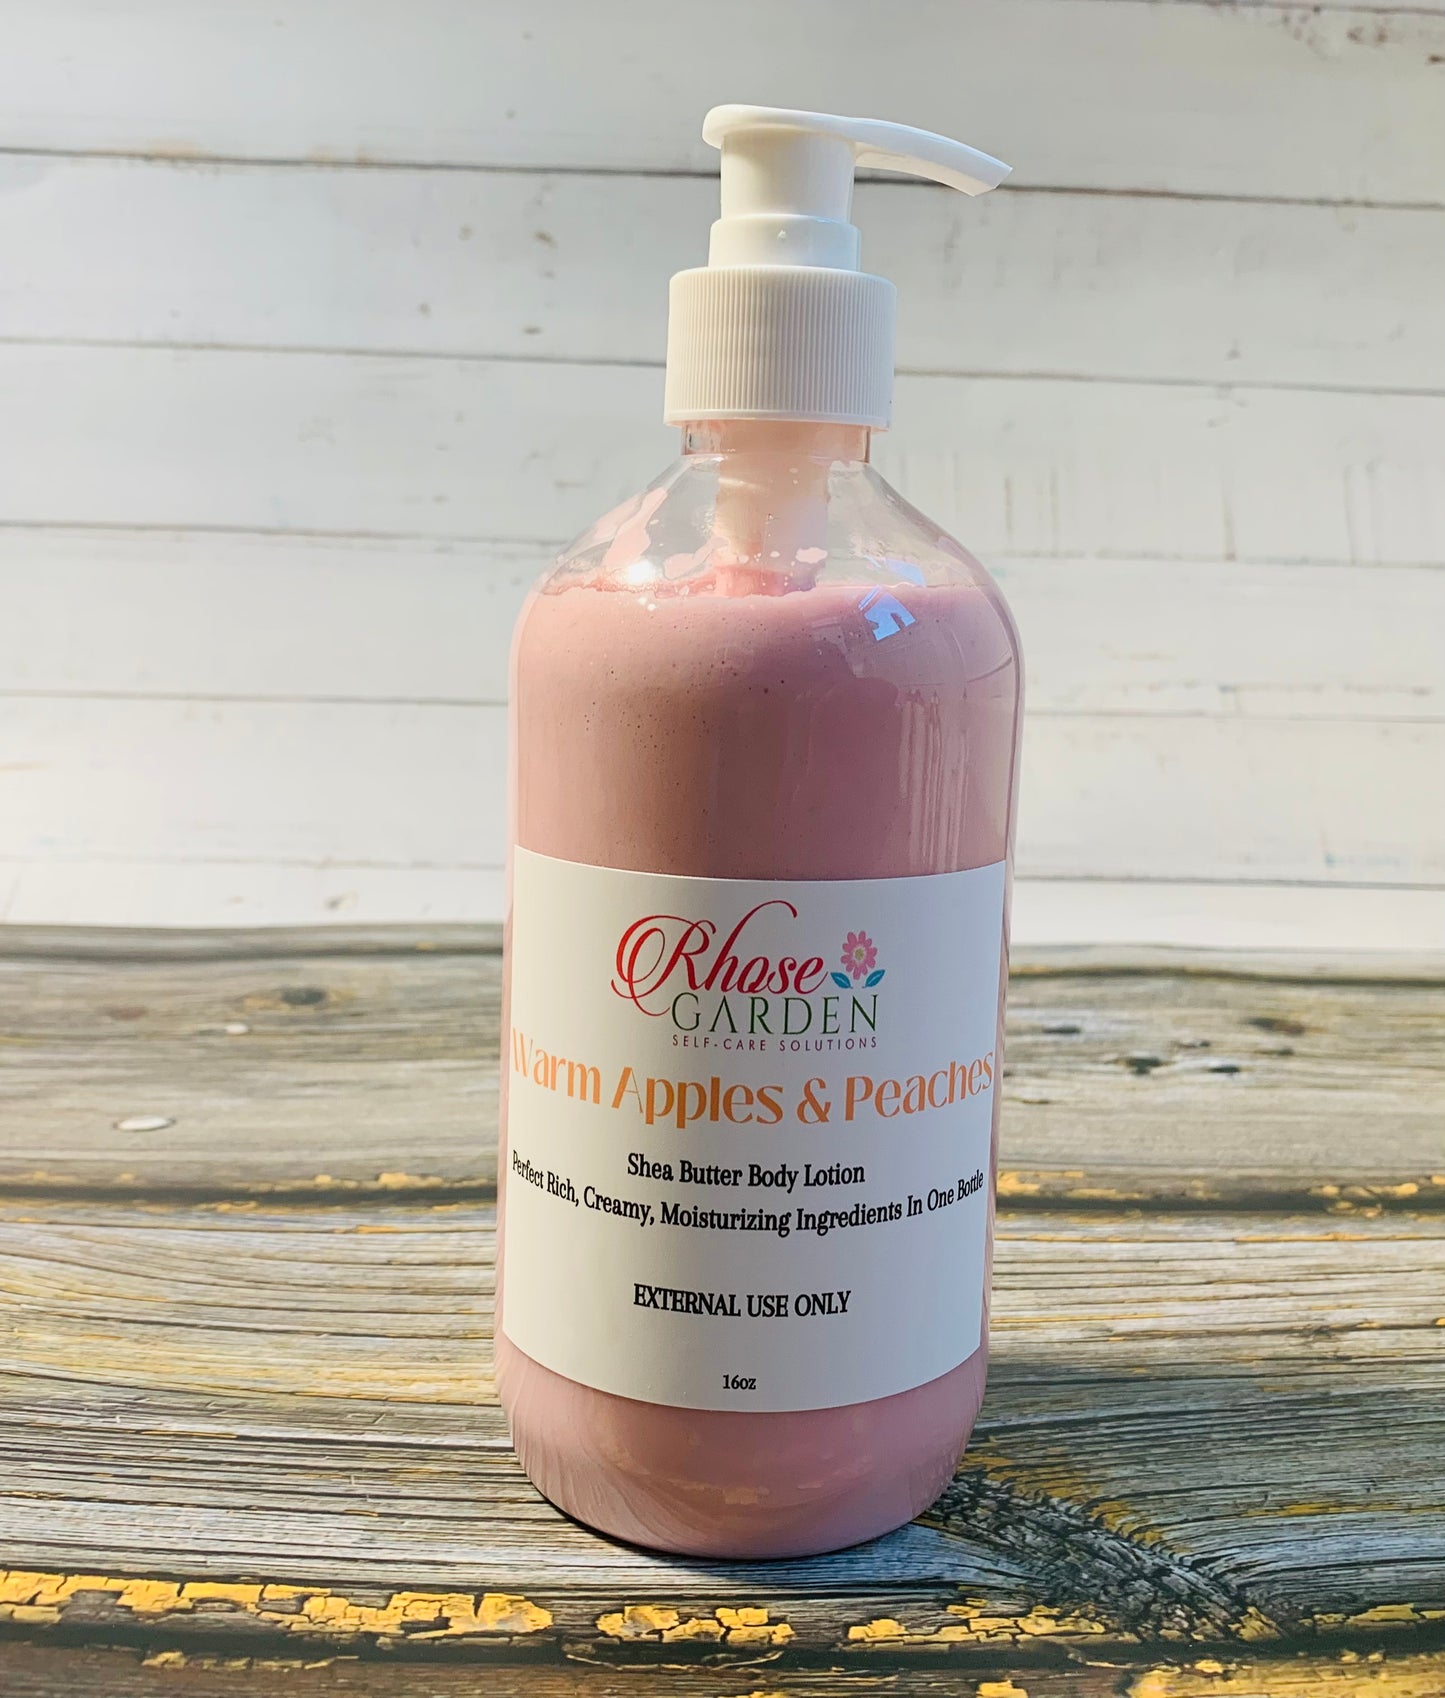 Warm Apples & Peaches Shea Butter Body Lotion